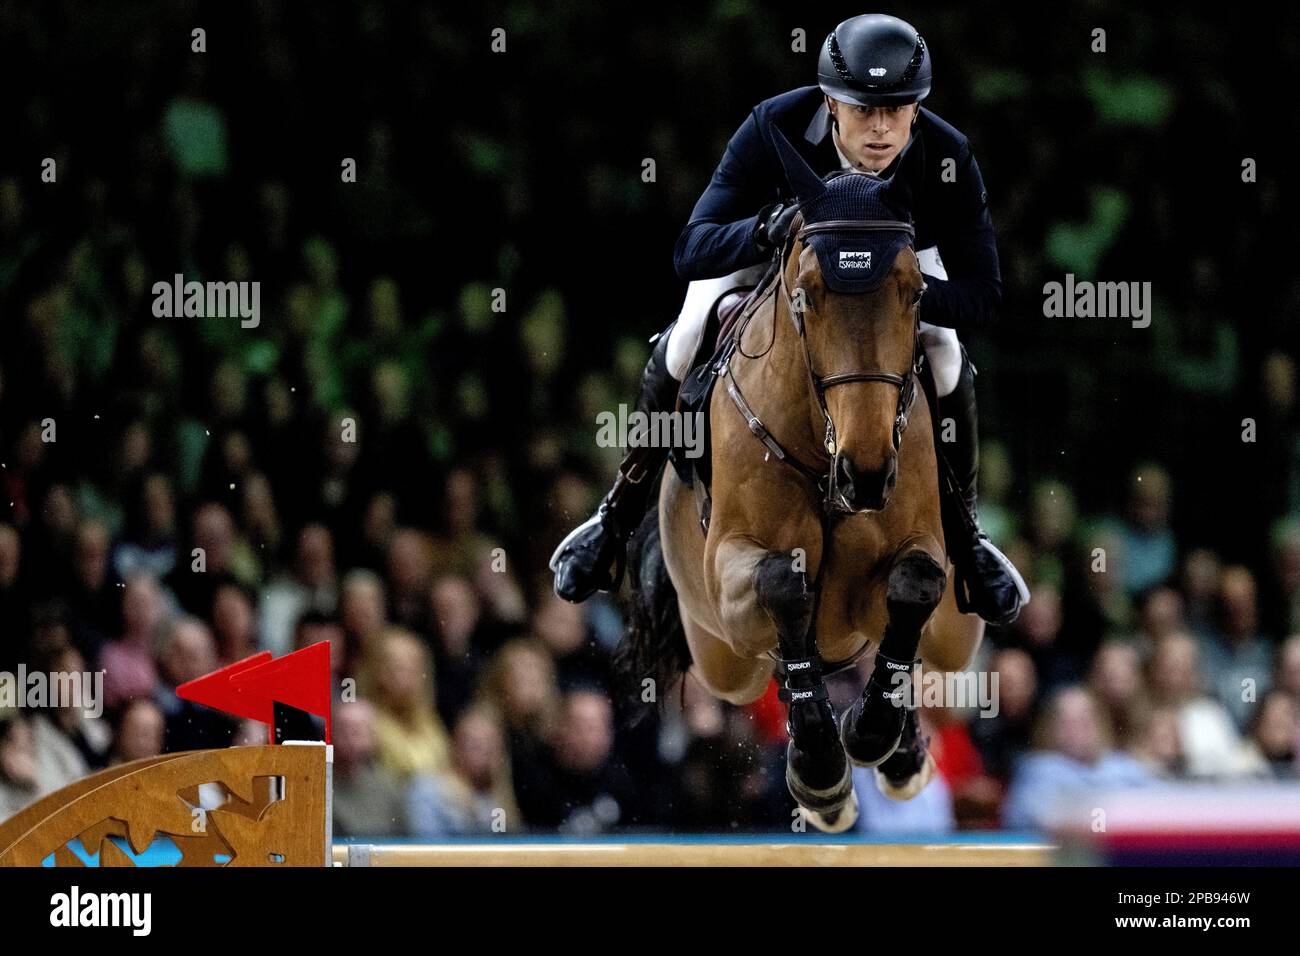 DEN BOSCH - Max Kuhner (AUT) on Elektric Blue P in action during the World Cup show jumping, during The Dutch Masters Indoor Brabant Horse Show. ANP SANDER KONING netherlands out - belgium out Stock Photo